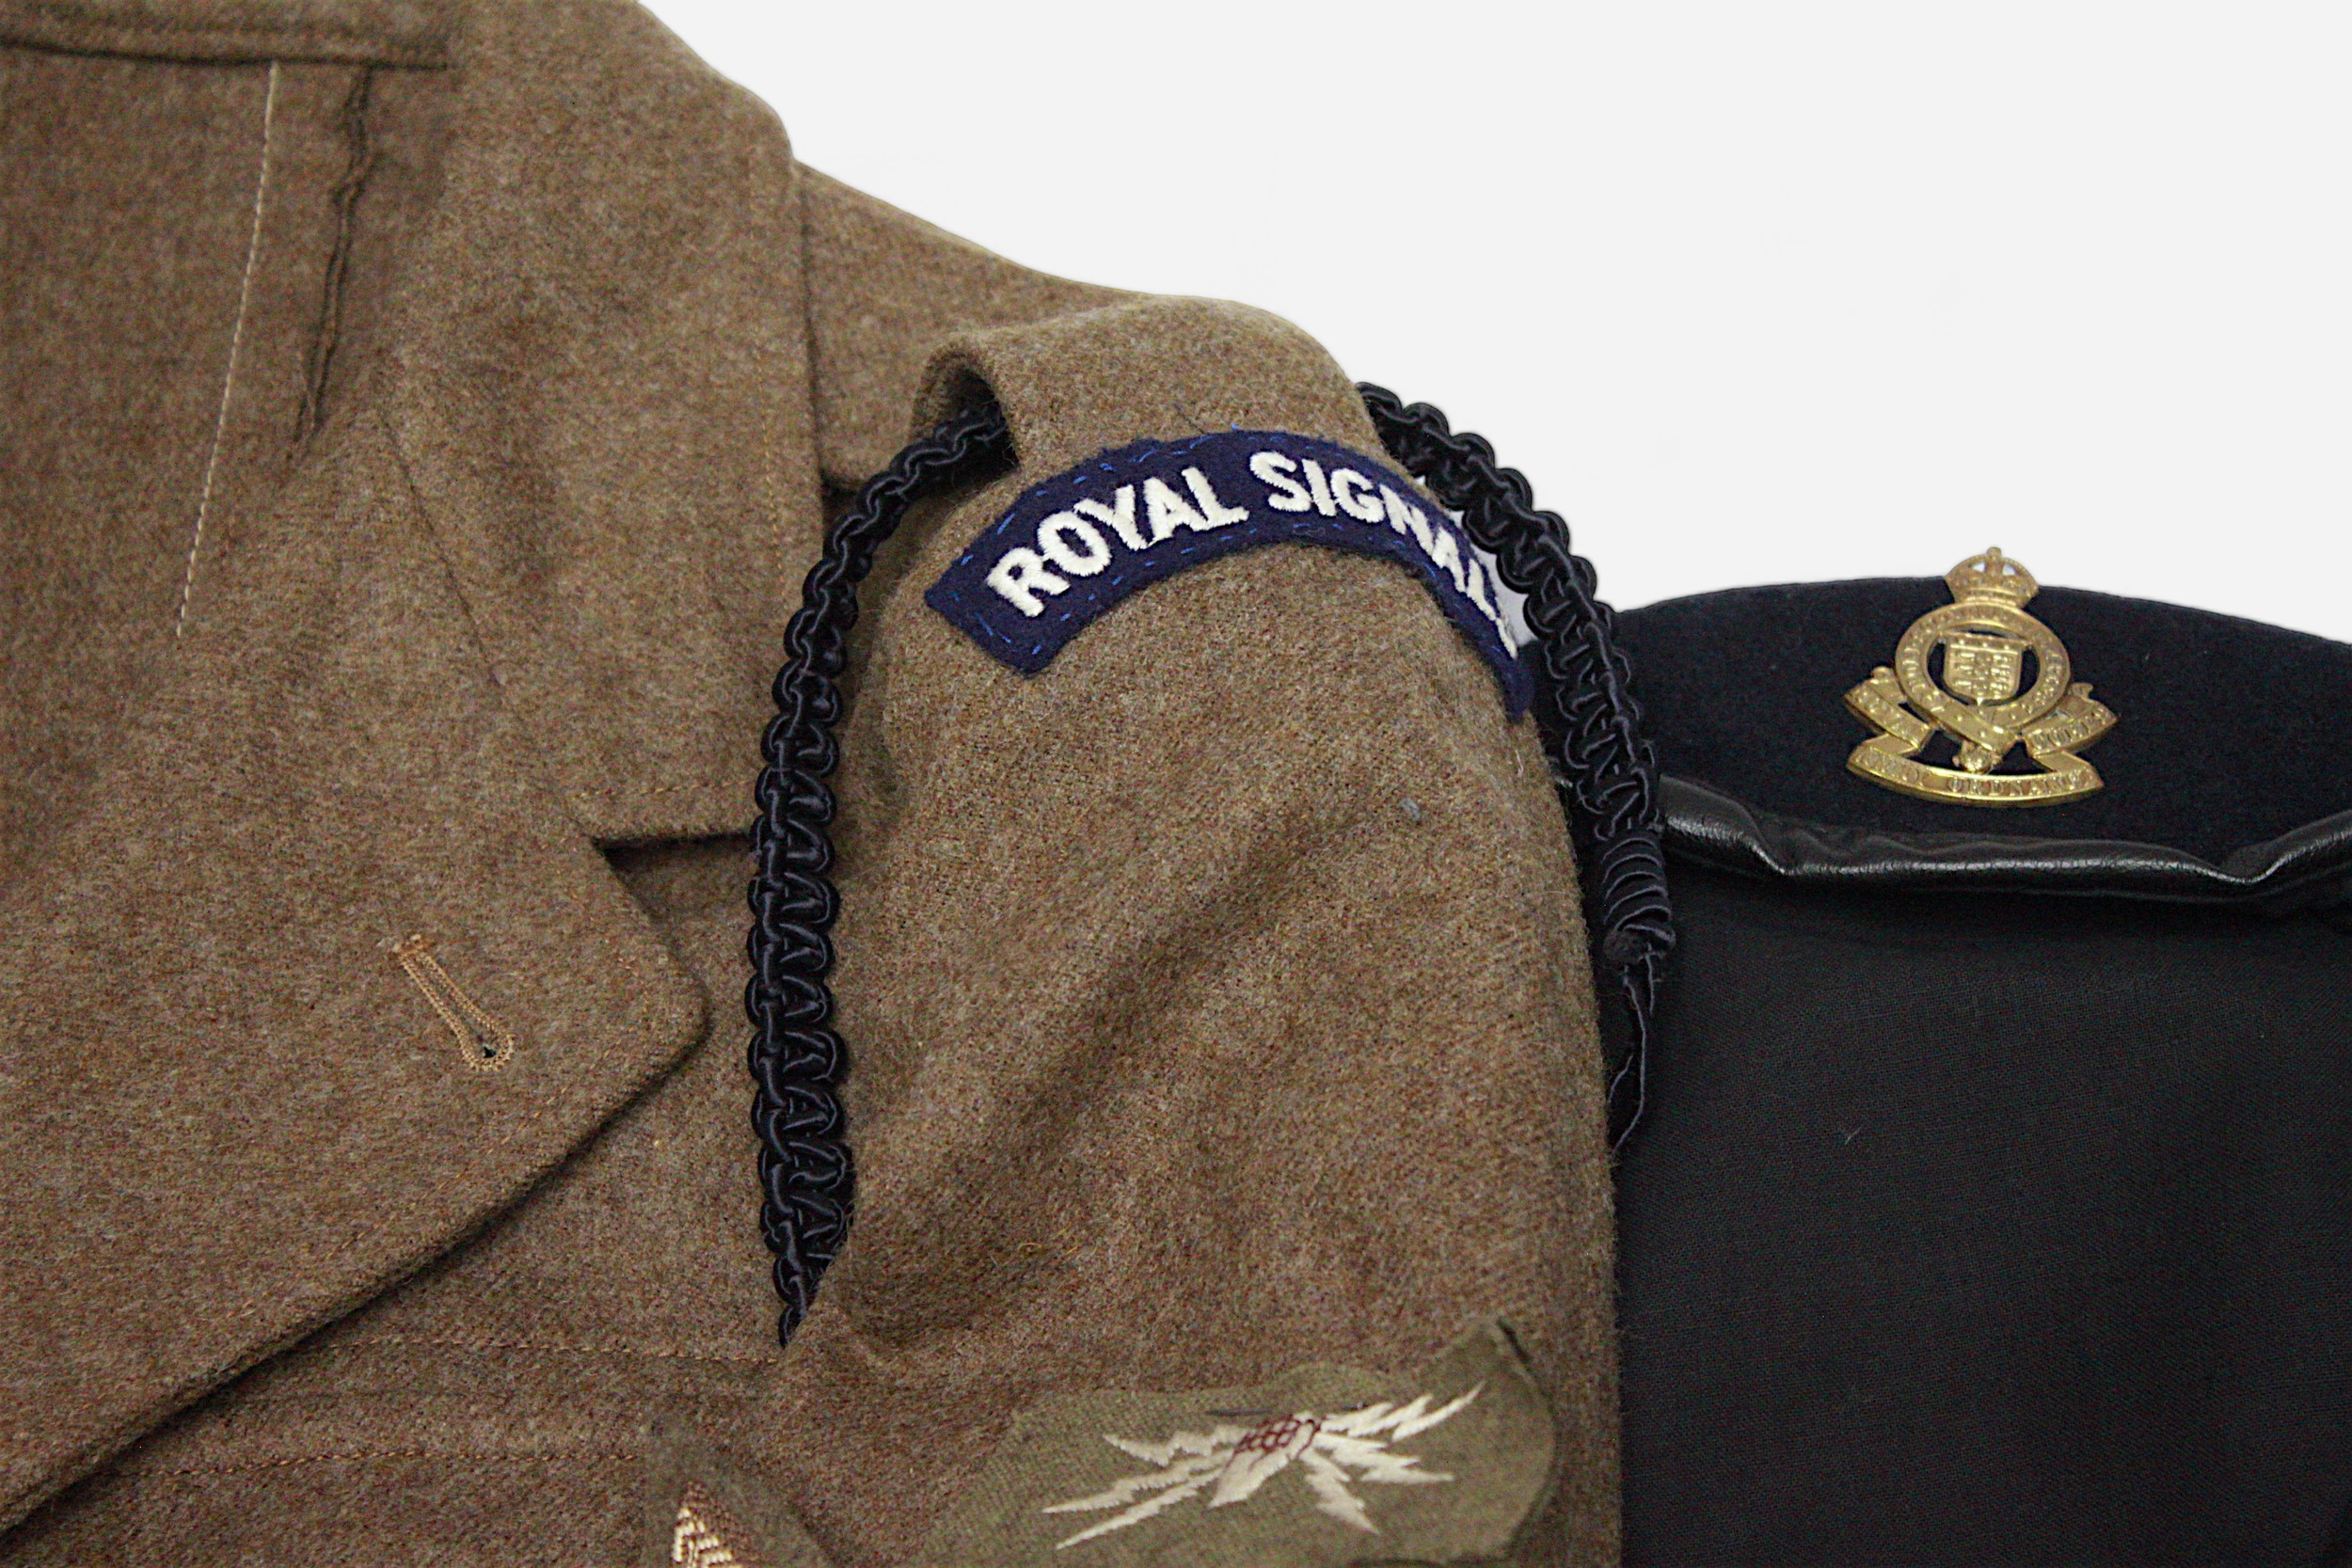 An RAF side cap and six British berets with cap badges for Para, Army Ordnance, Royal Hampshires, - Image 4 of 5